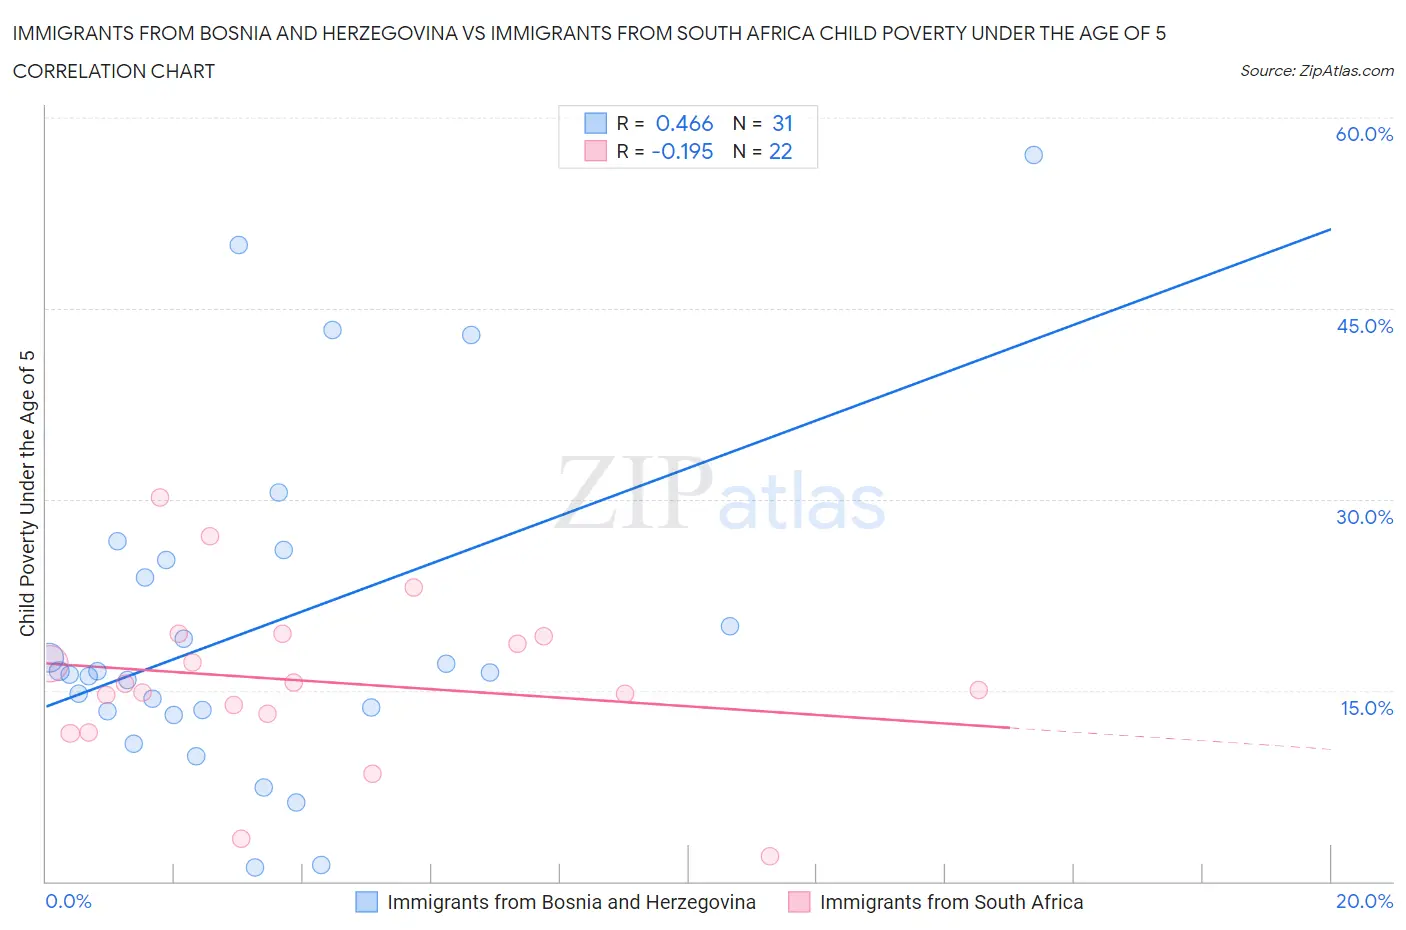 Immigrants from Bosnia and Herzegovina vs Immigrants from South Africa Child Poverty Under the Age of 5